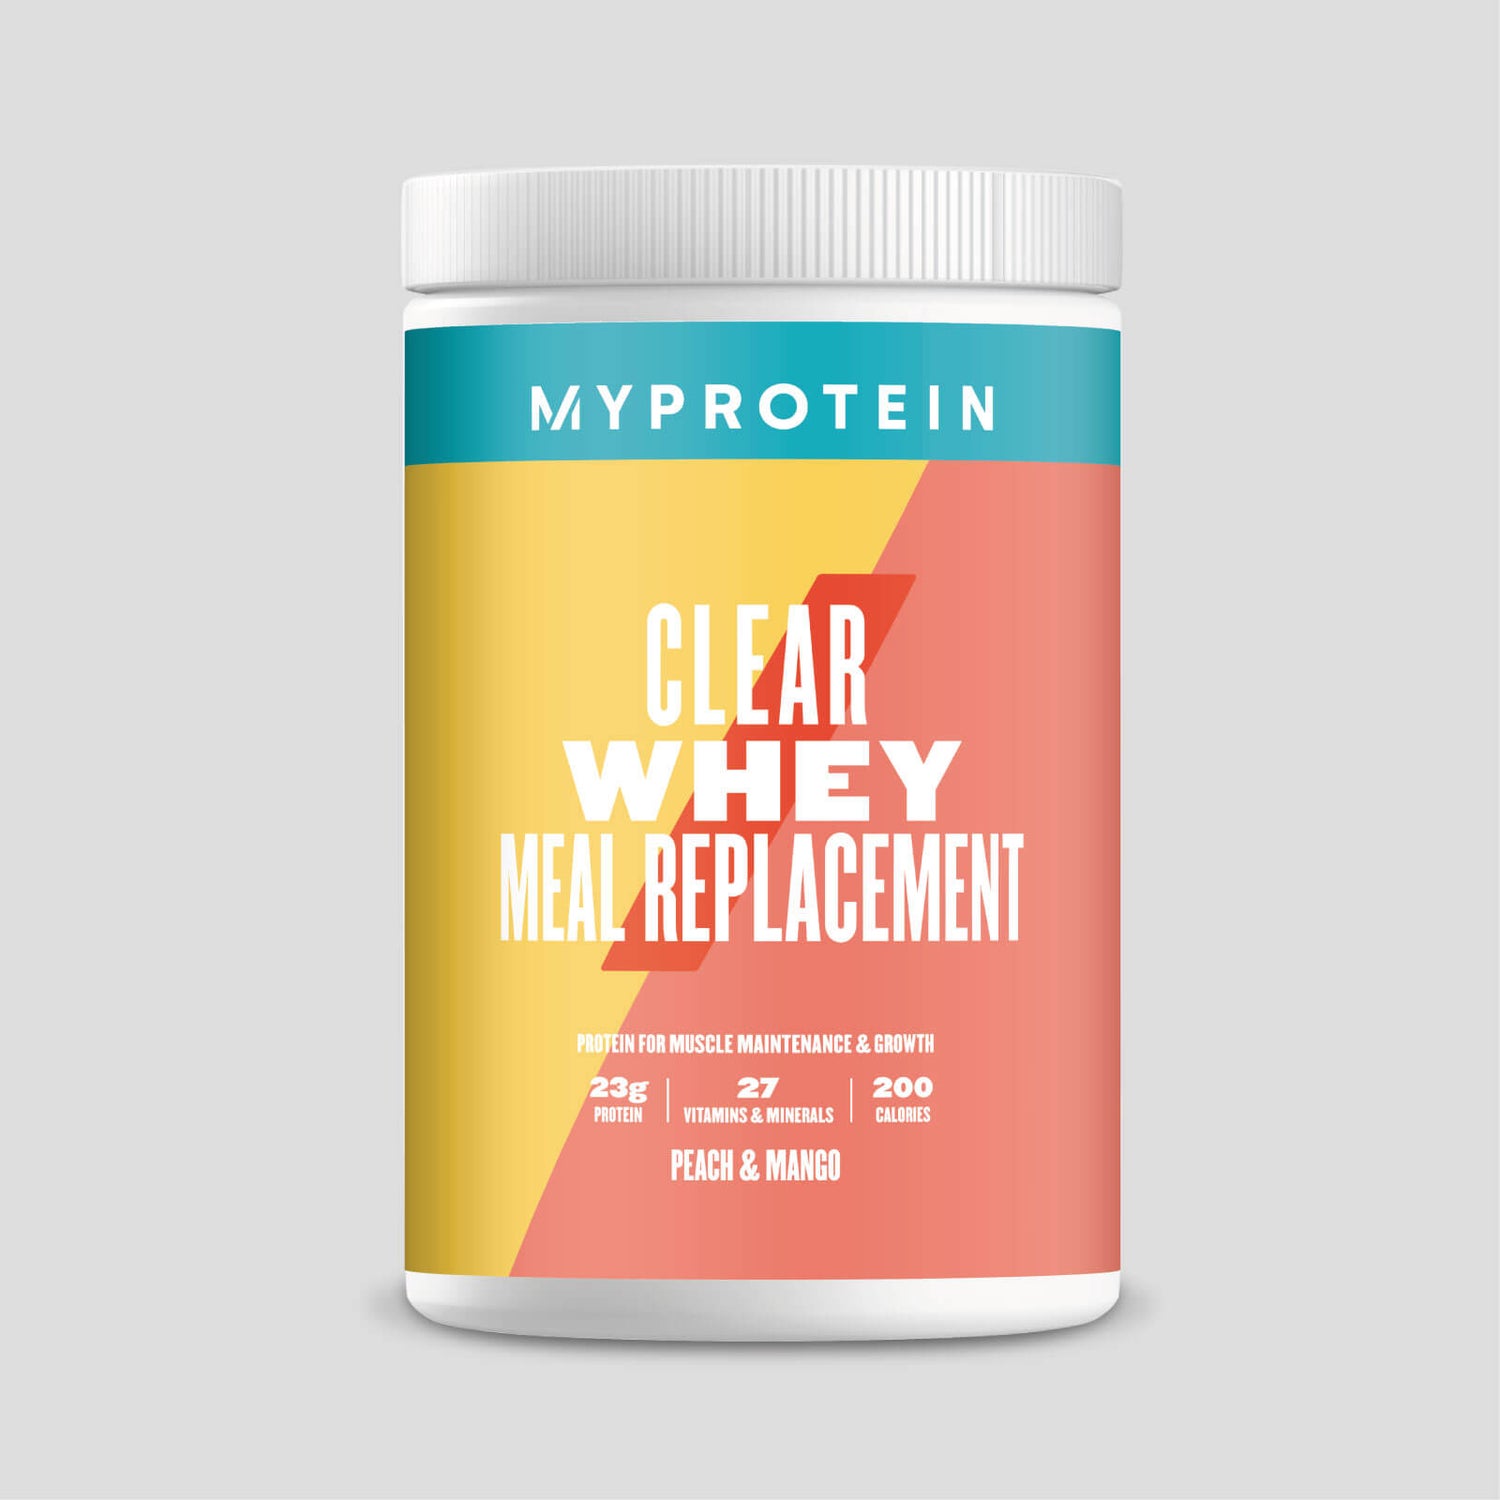 Myprotein Clear Whey Meal Replacement Shake - 10份装 - 桃子芒果味